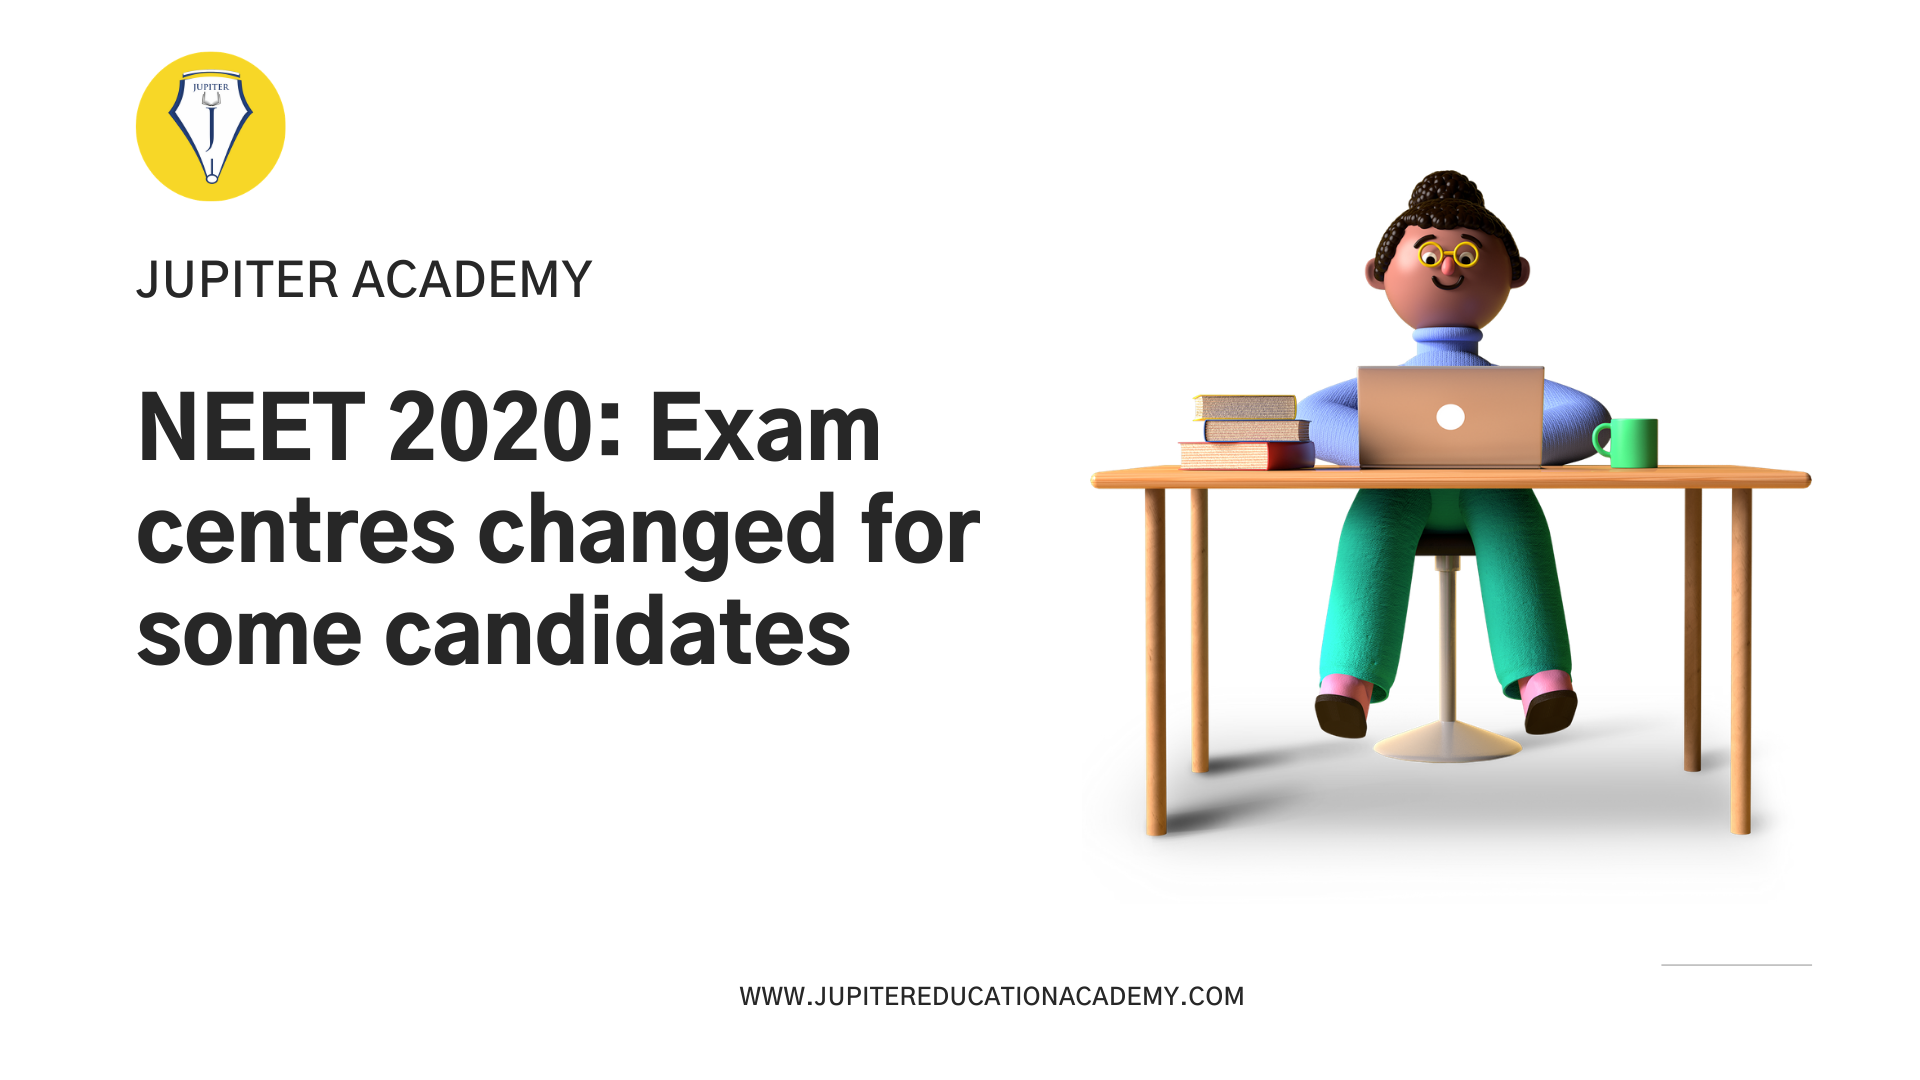 You are currently viewing NEET 2020: NTA CHANGES EXAMINATION CENTRE FOR SOME CANDIDATES DUE TO COVID-19 RESTRICTION